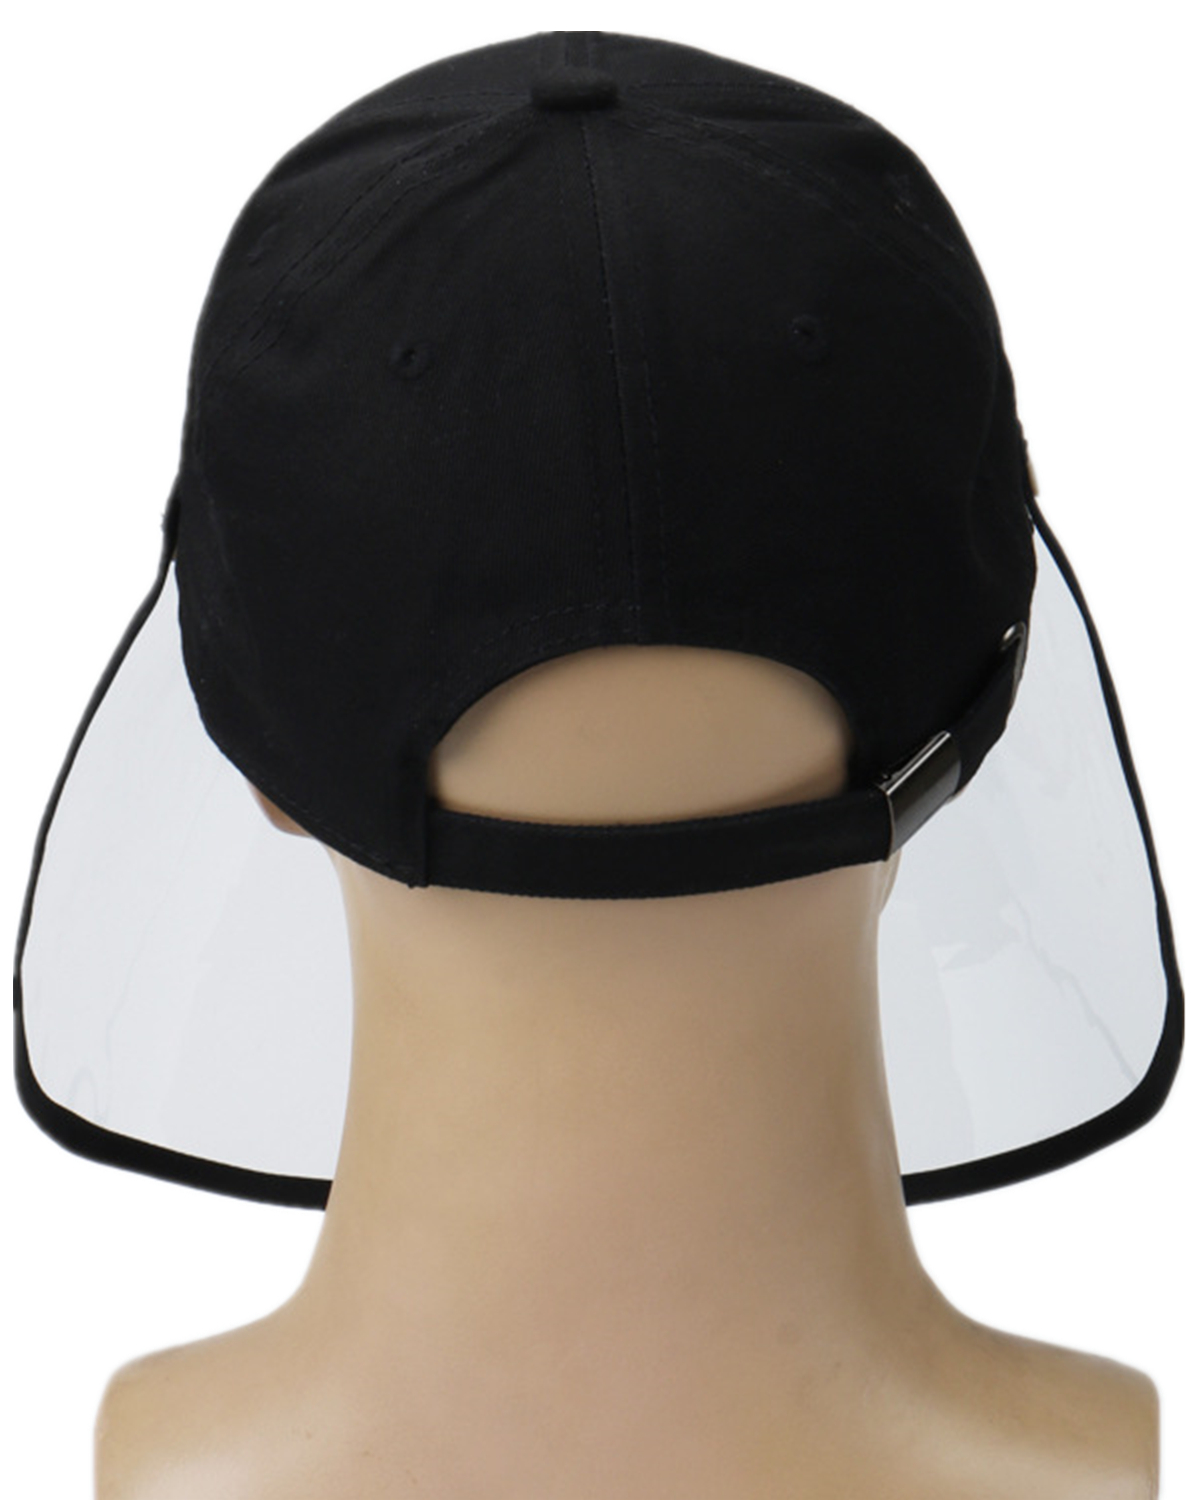 2-In1-Detachable-Double-Sides-Full-Face-Shield-with-Hat-Anti-Fog-Saliva-Dustproof-Protective-Cover-B-1670890-3